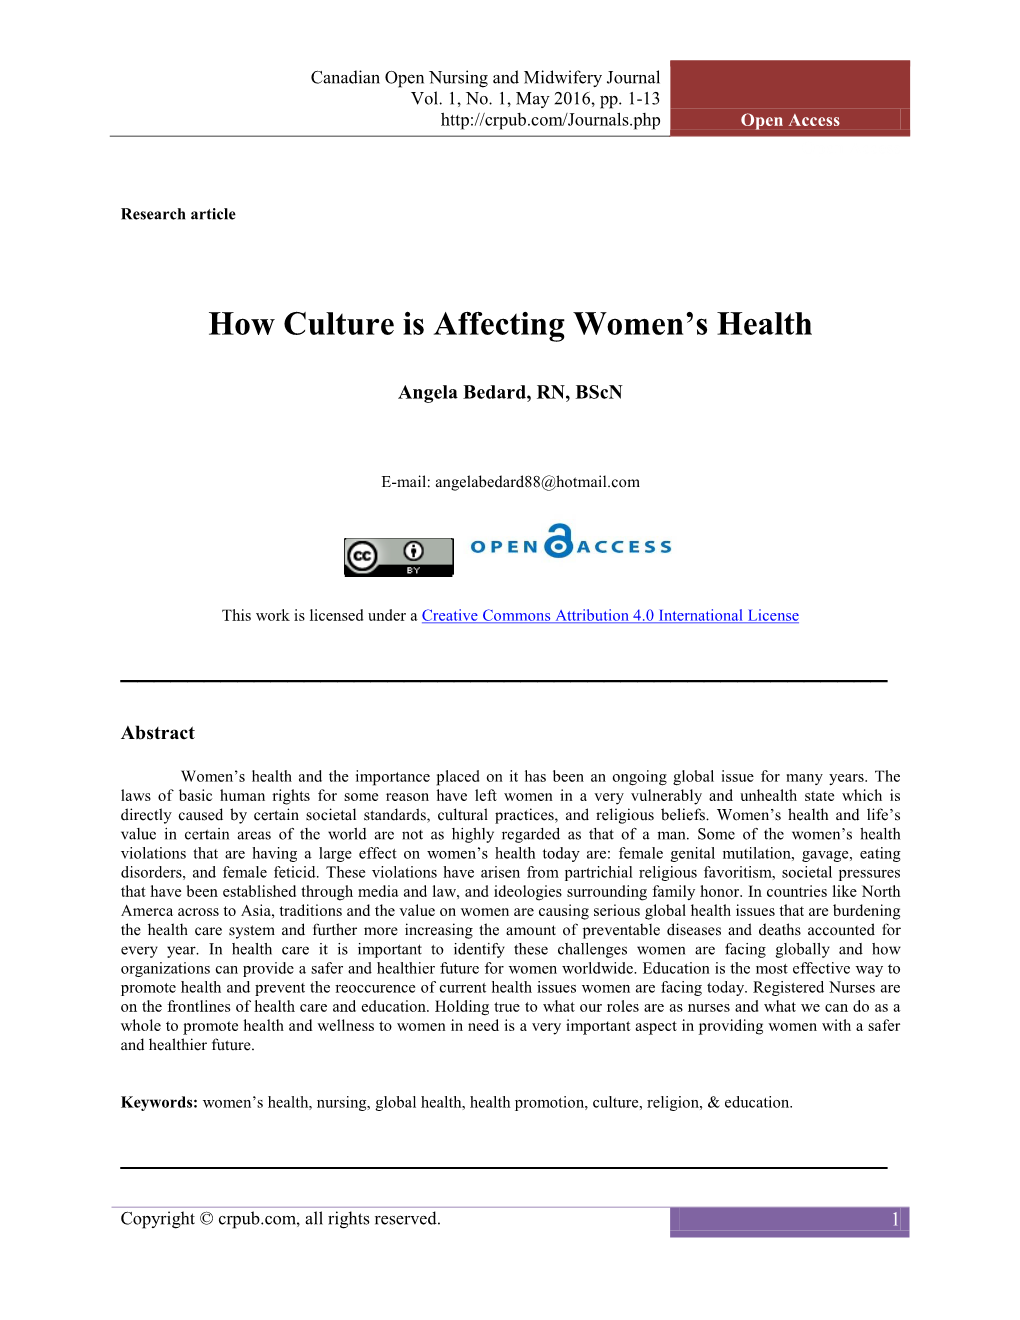 How Culture Is Affecting Women's Health